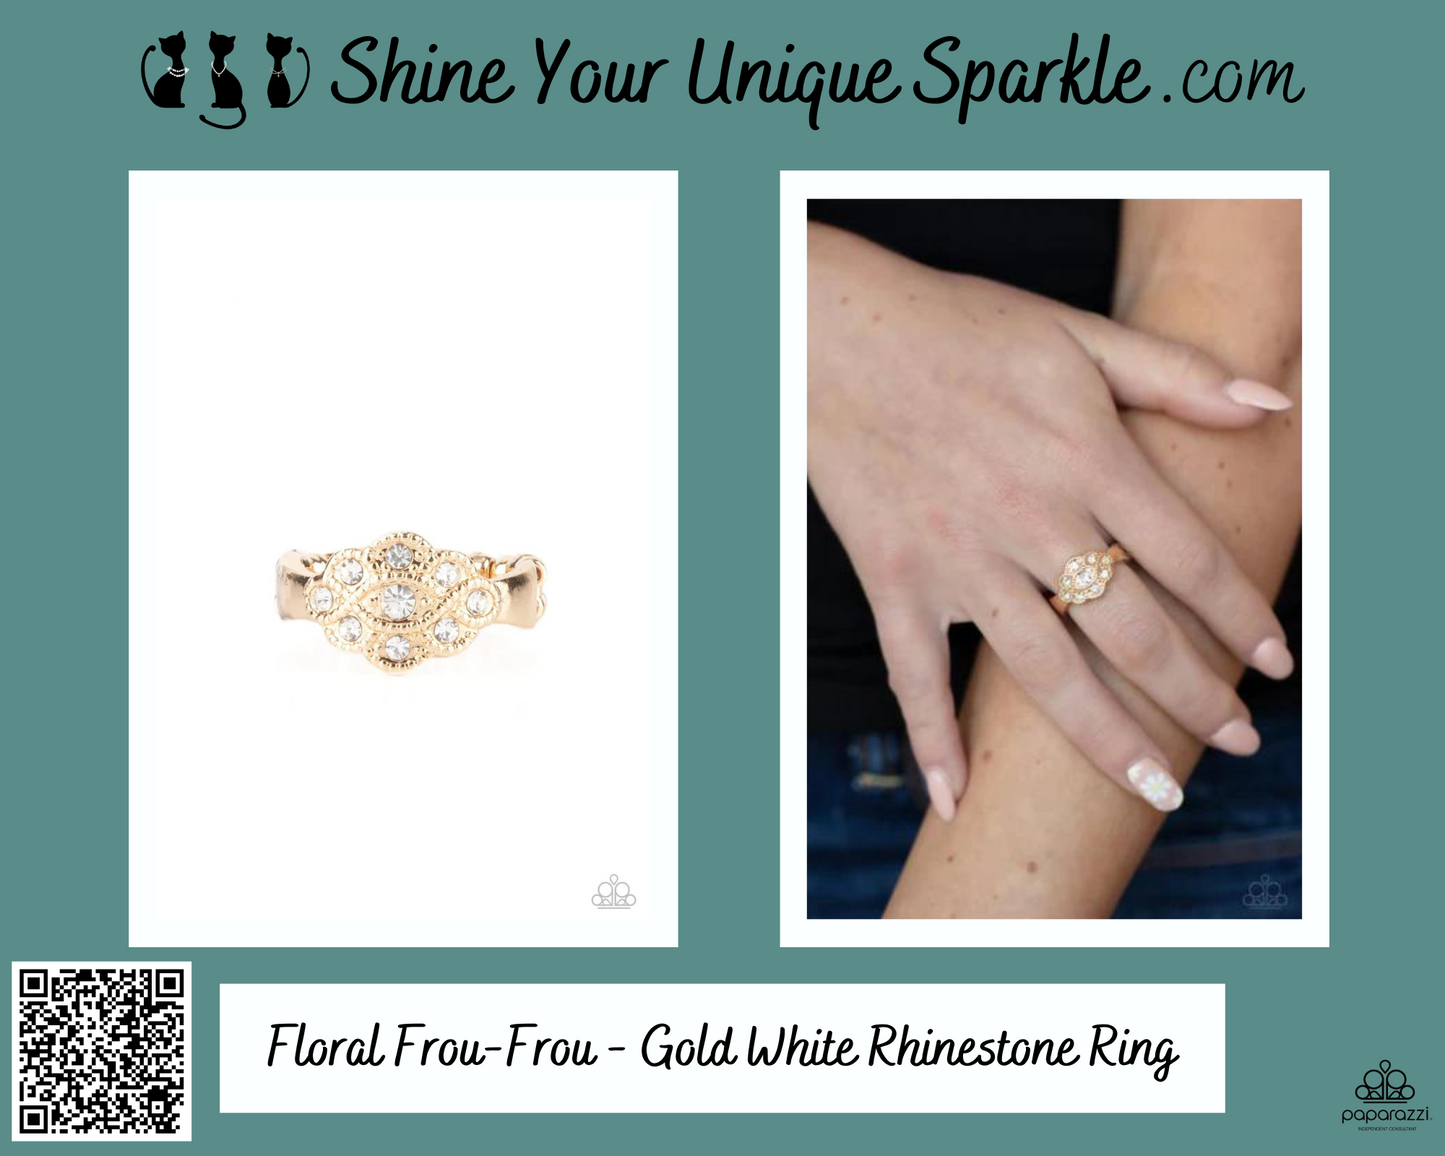 Floral Frou-Frou - Gold White Rhinestone Ring